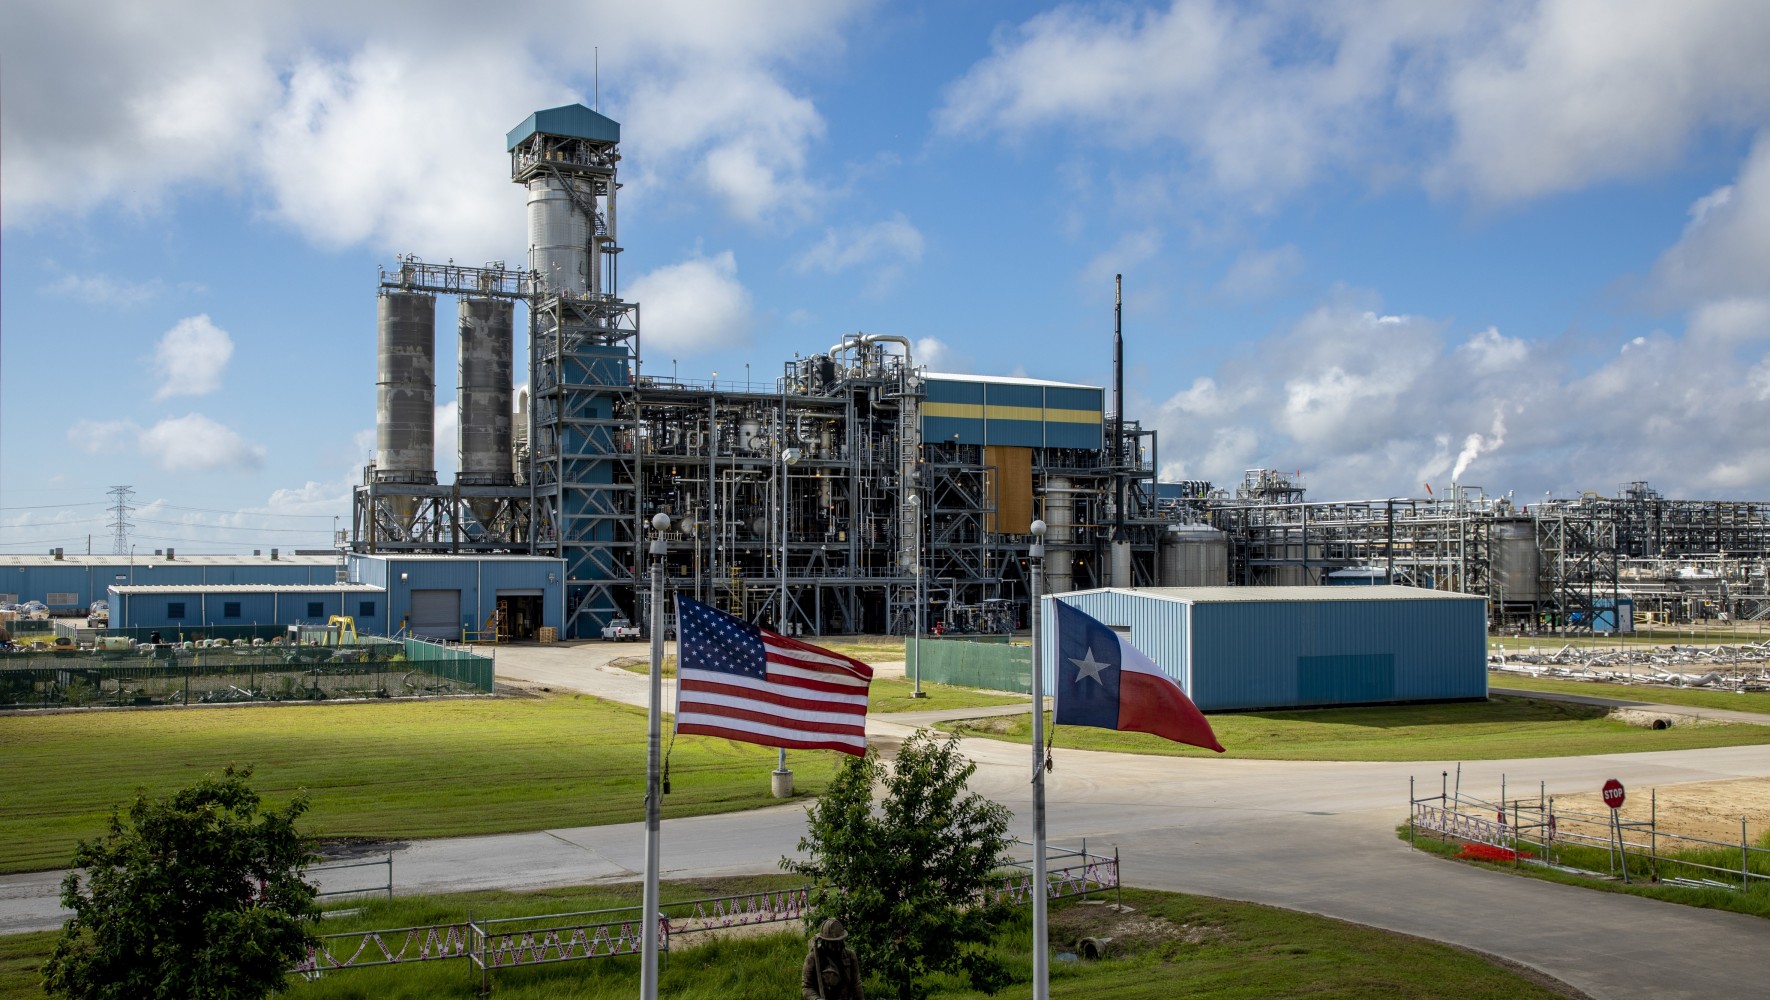 The polycarbonate production plant is part of Covestro's Baytown site.